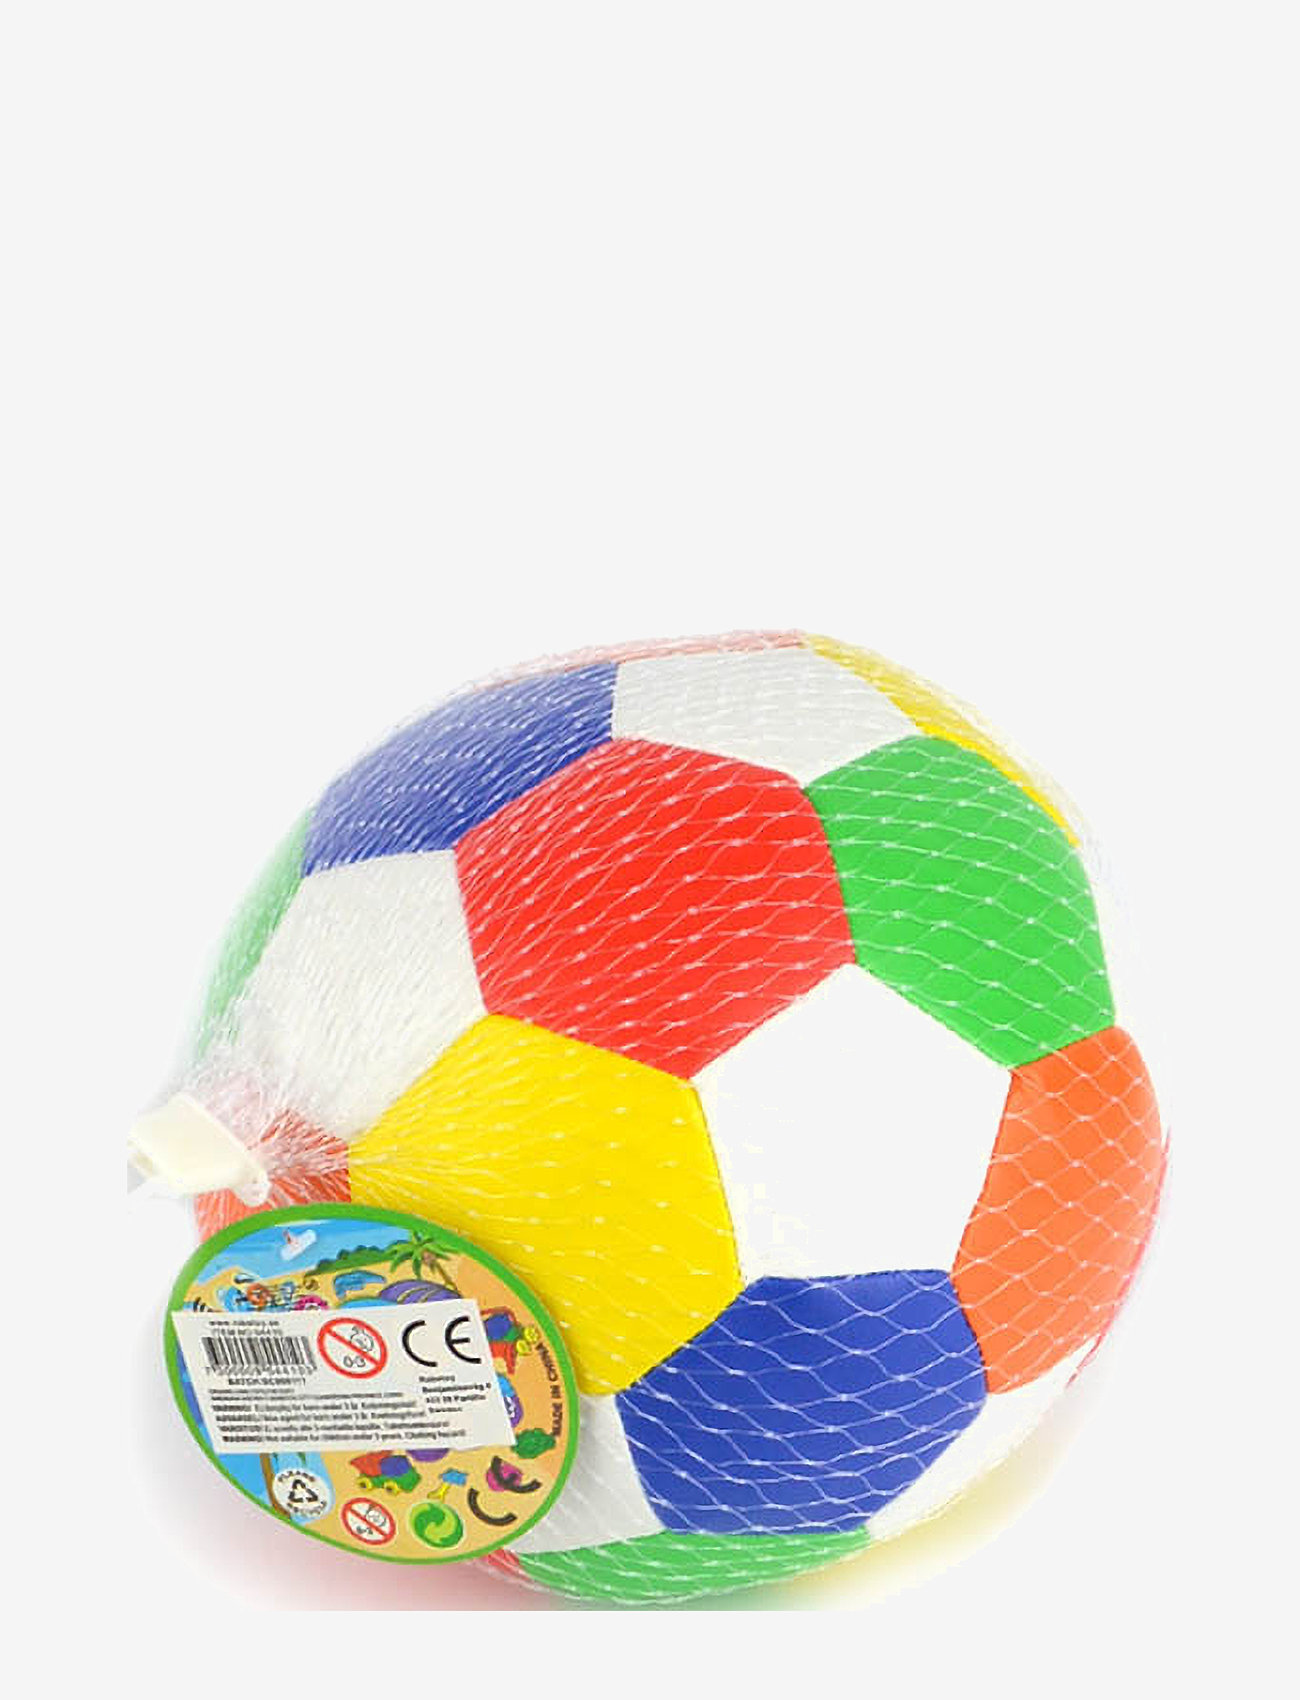 Robetoy - FOOTBALL SOFT COLOR - sommarfynd - 1016 - 1